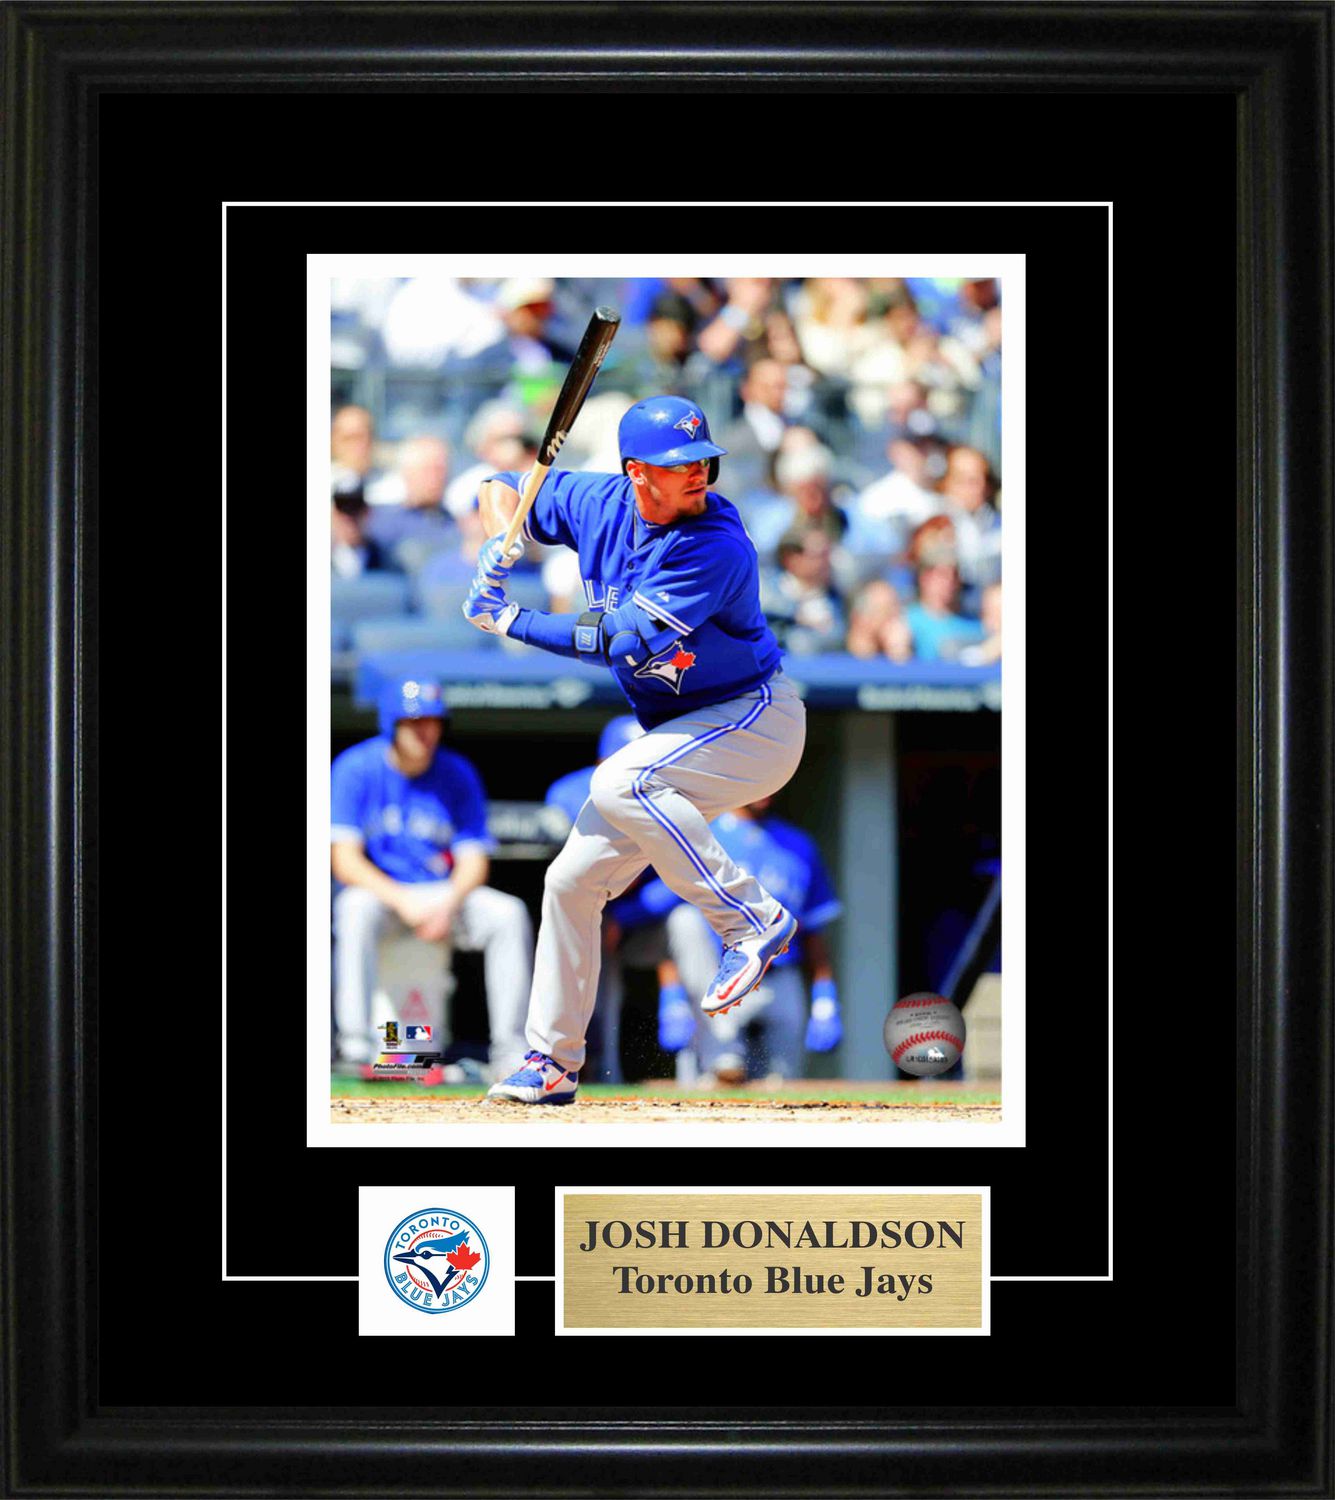 Toronto Blue Jays Diving Frameworth Josh Donaldson 8x10-Inch Photo with Pin and Plate Frame